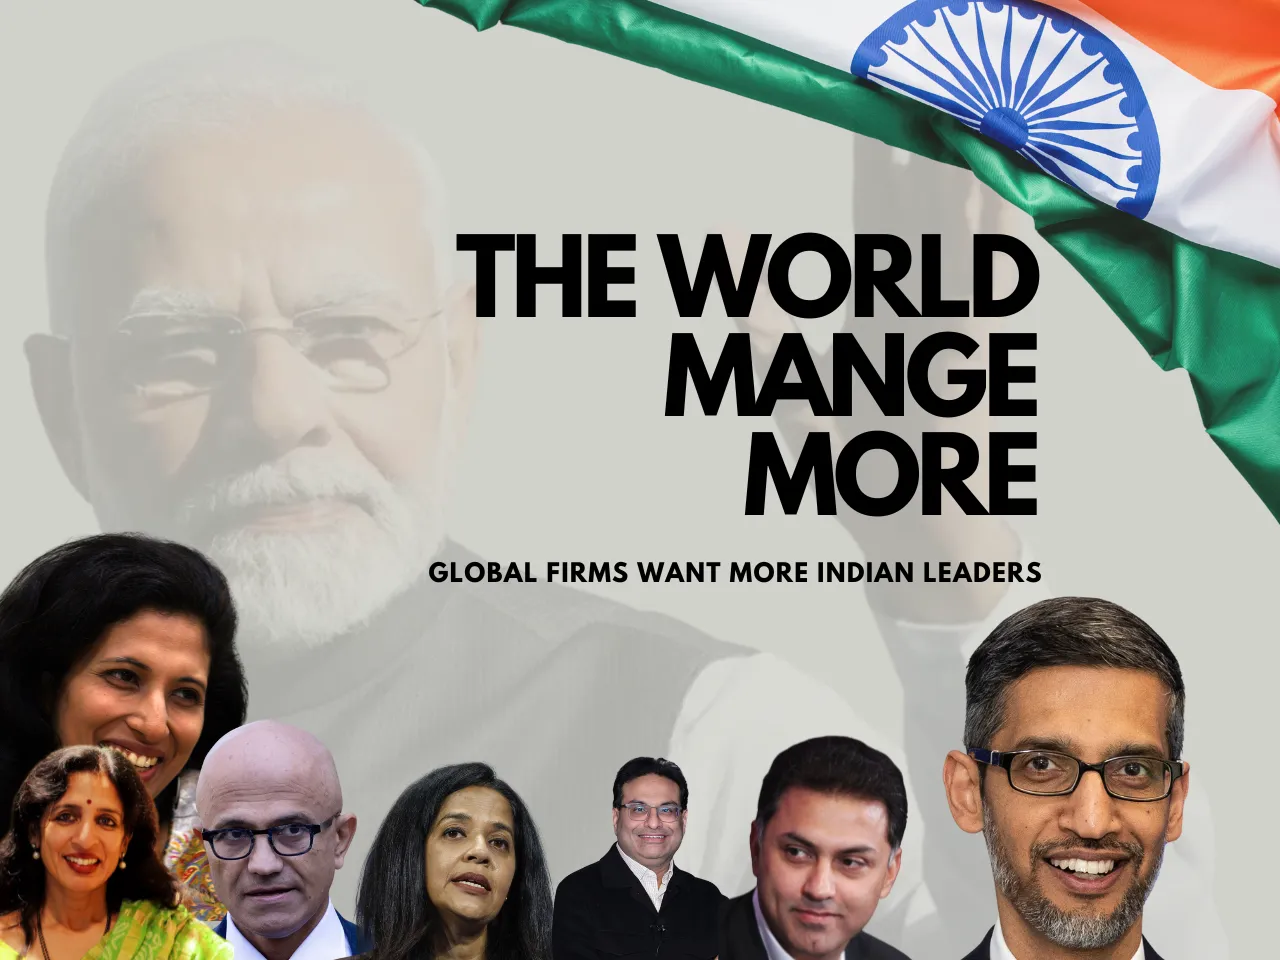 Why Do Global Firms Want More Indian Leaders?